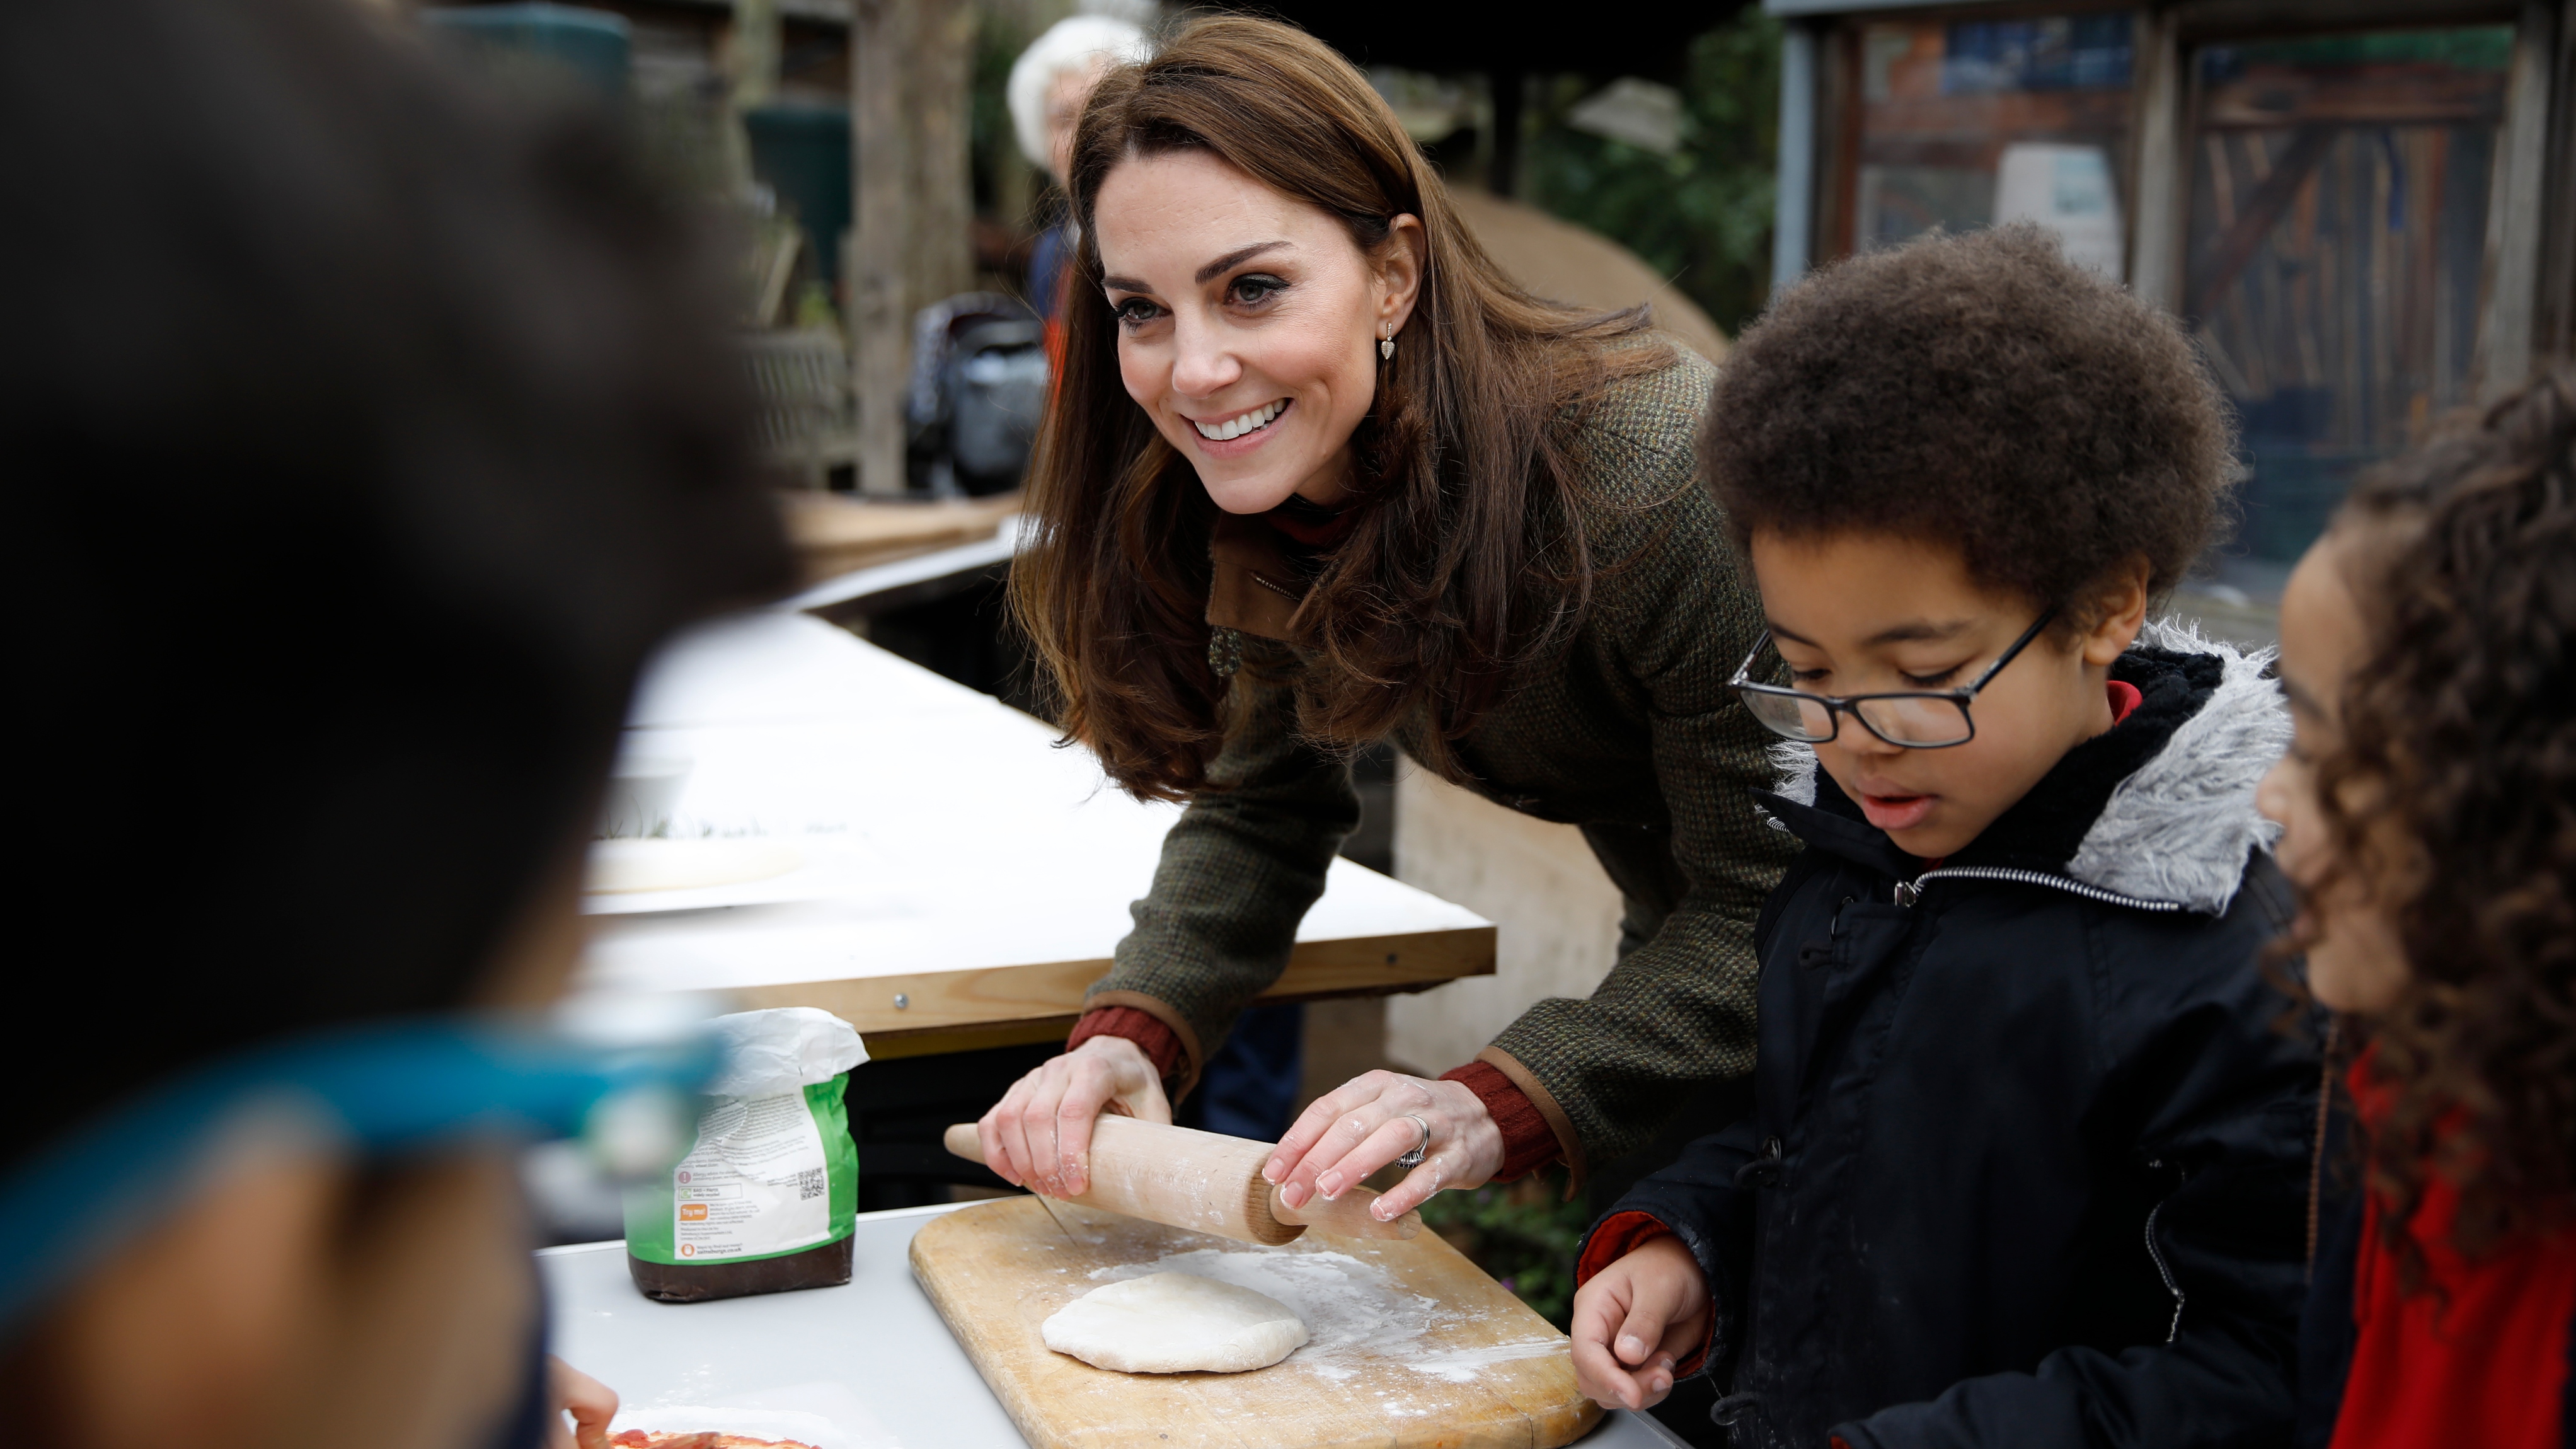 Catherine, Princess of Wales speaks with children and helps makes pizza as she visits Islington Community Garden